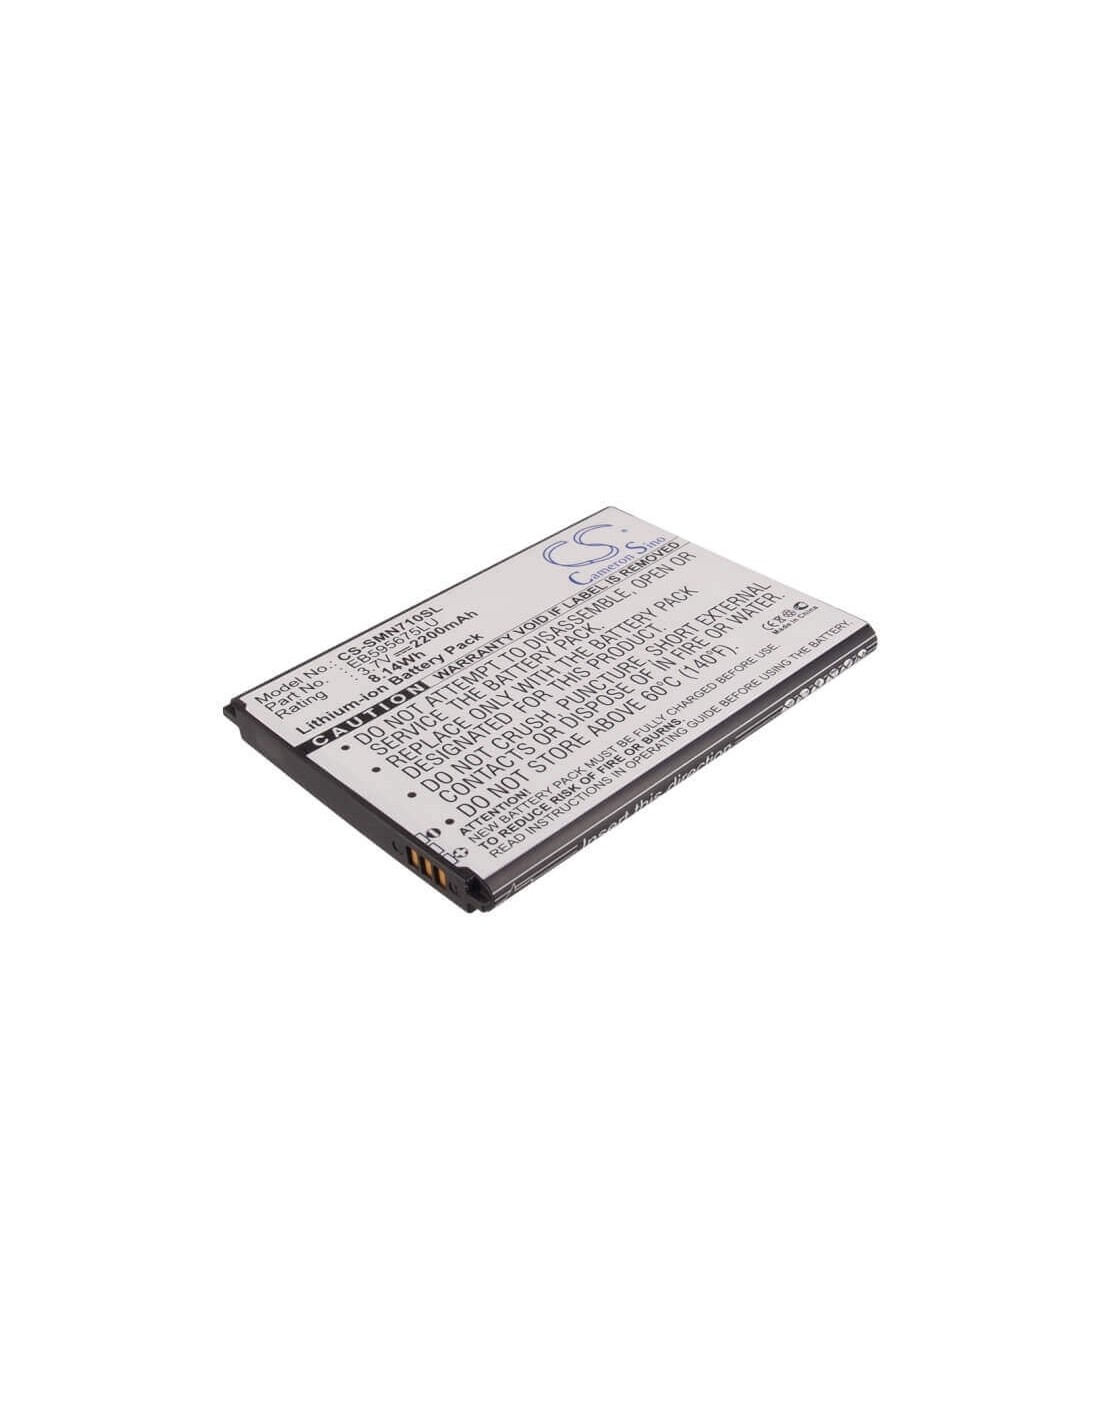 Battery for Samsung GT-N7100, GT-N7105, Galaxy Note II LTE 32GB 3.7V, 2200mAh - 8.14Wh